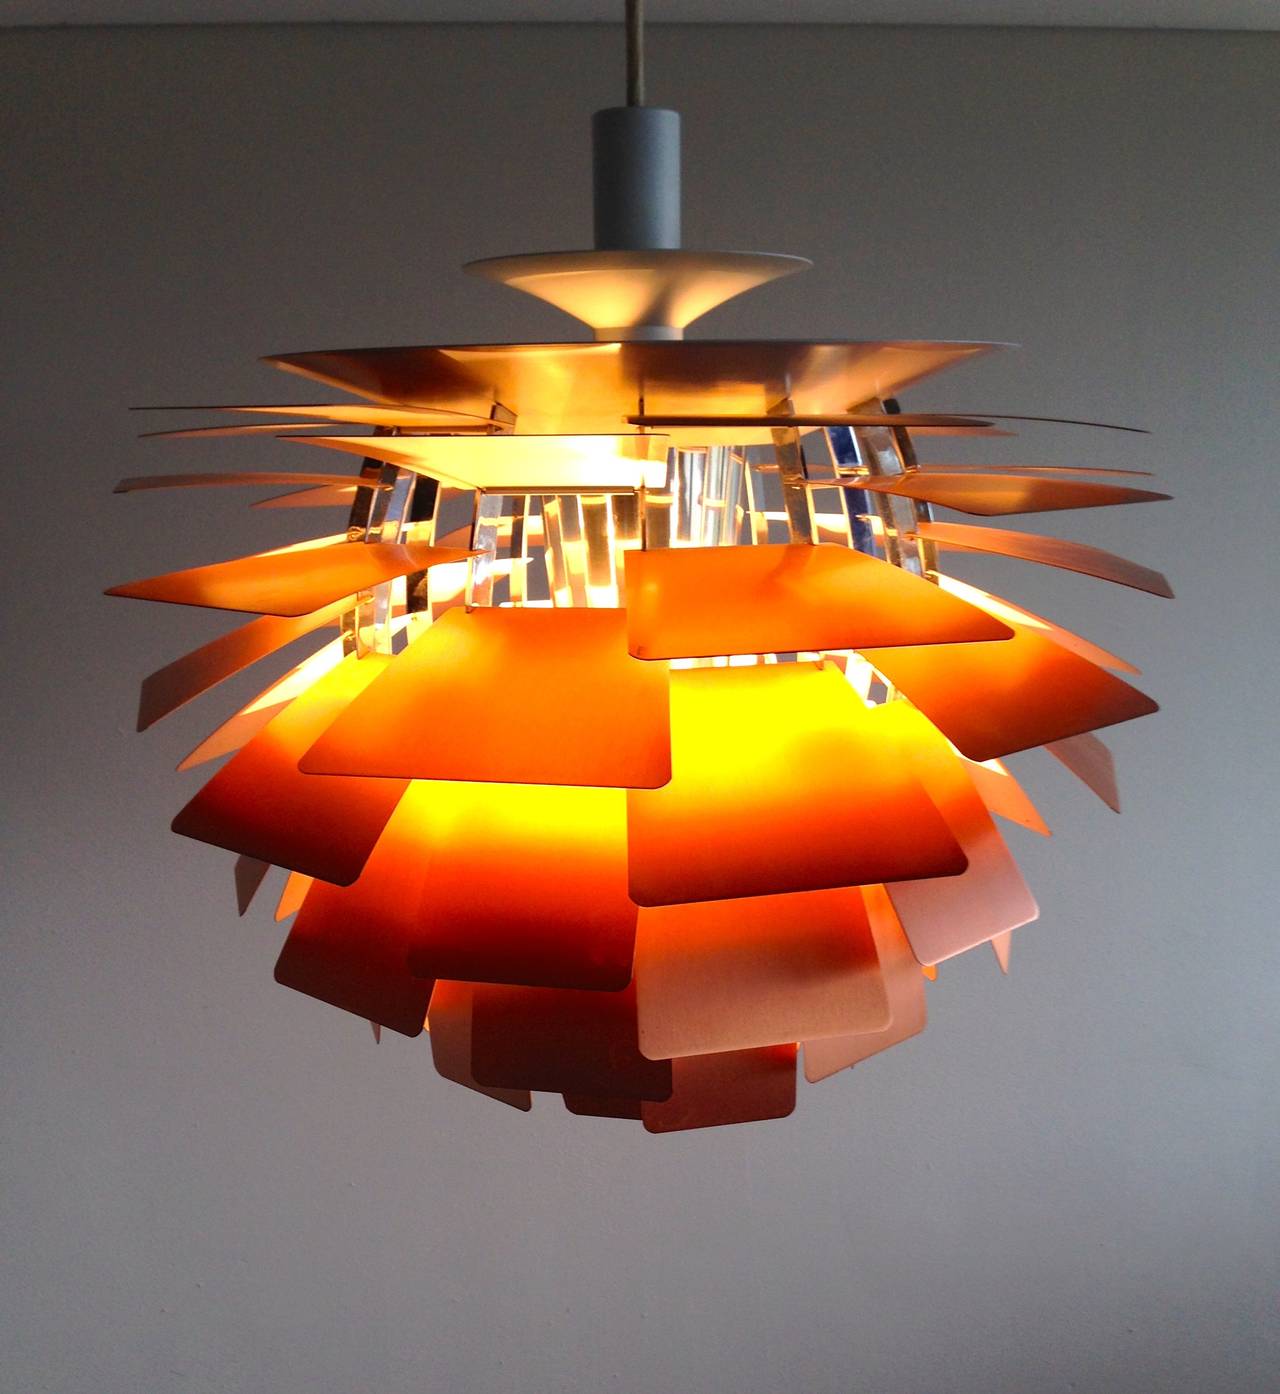 The PH Artichoke is considered to be a masterpiece of mid century modern design by Poul Henningsen for Louis Poulsen Denmark.
This particular lamp is from the 1970s with the single steel wire mount. The one and only you would want!

Competitive